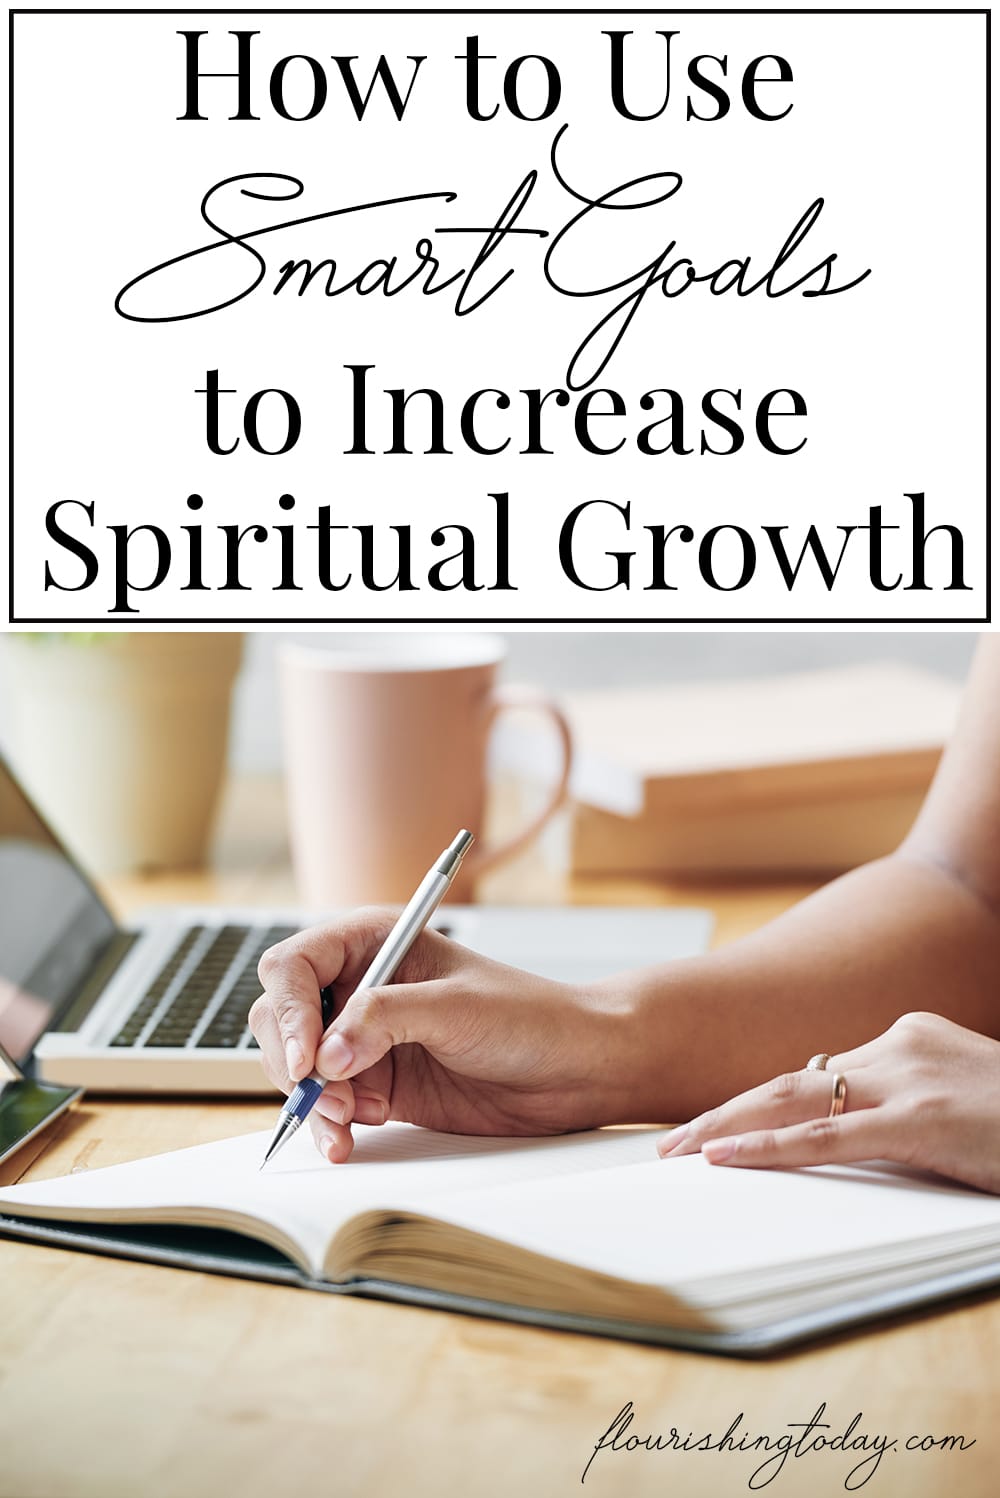 Do you want to grow in your spiritual life? Have you set goals to accomplish what you want? Learn how to use SMART goals to help you grow spiritually. #smartgoals #goalsetting #spiritualgrowth #setyourgoals